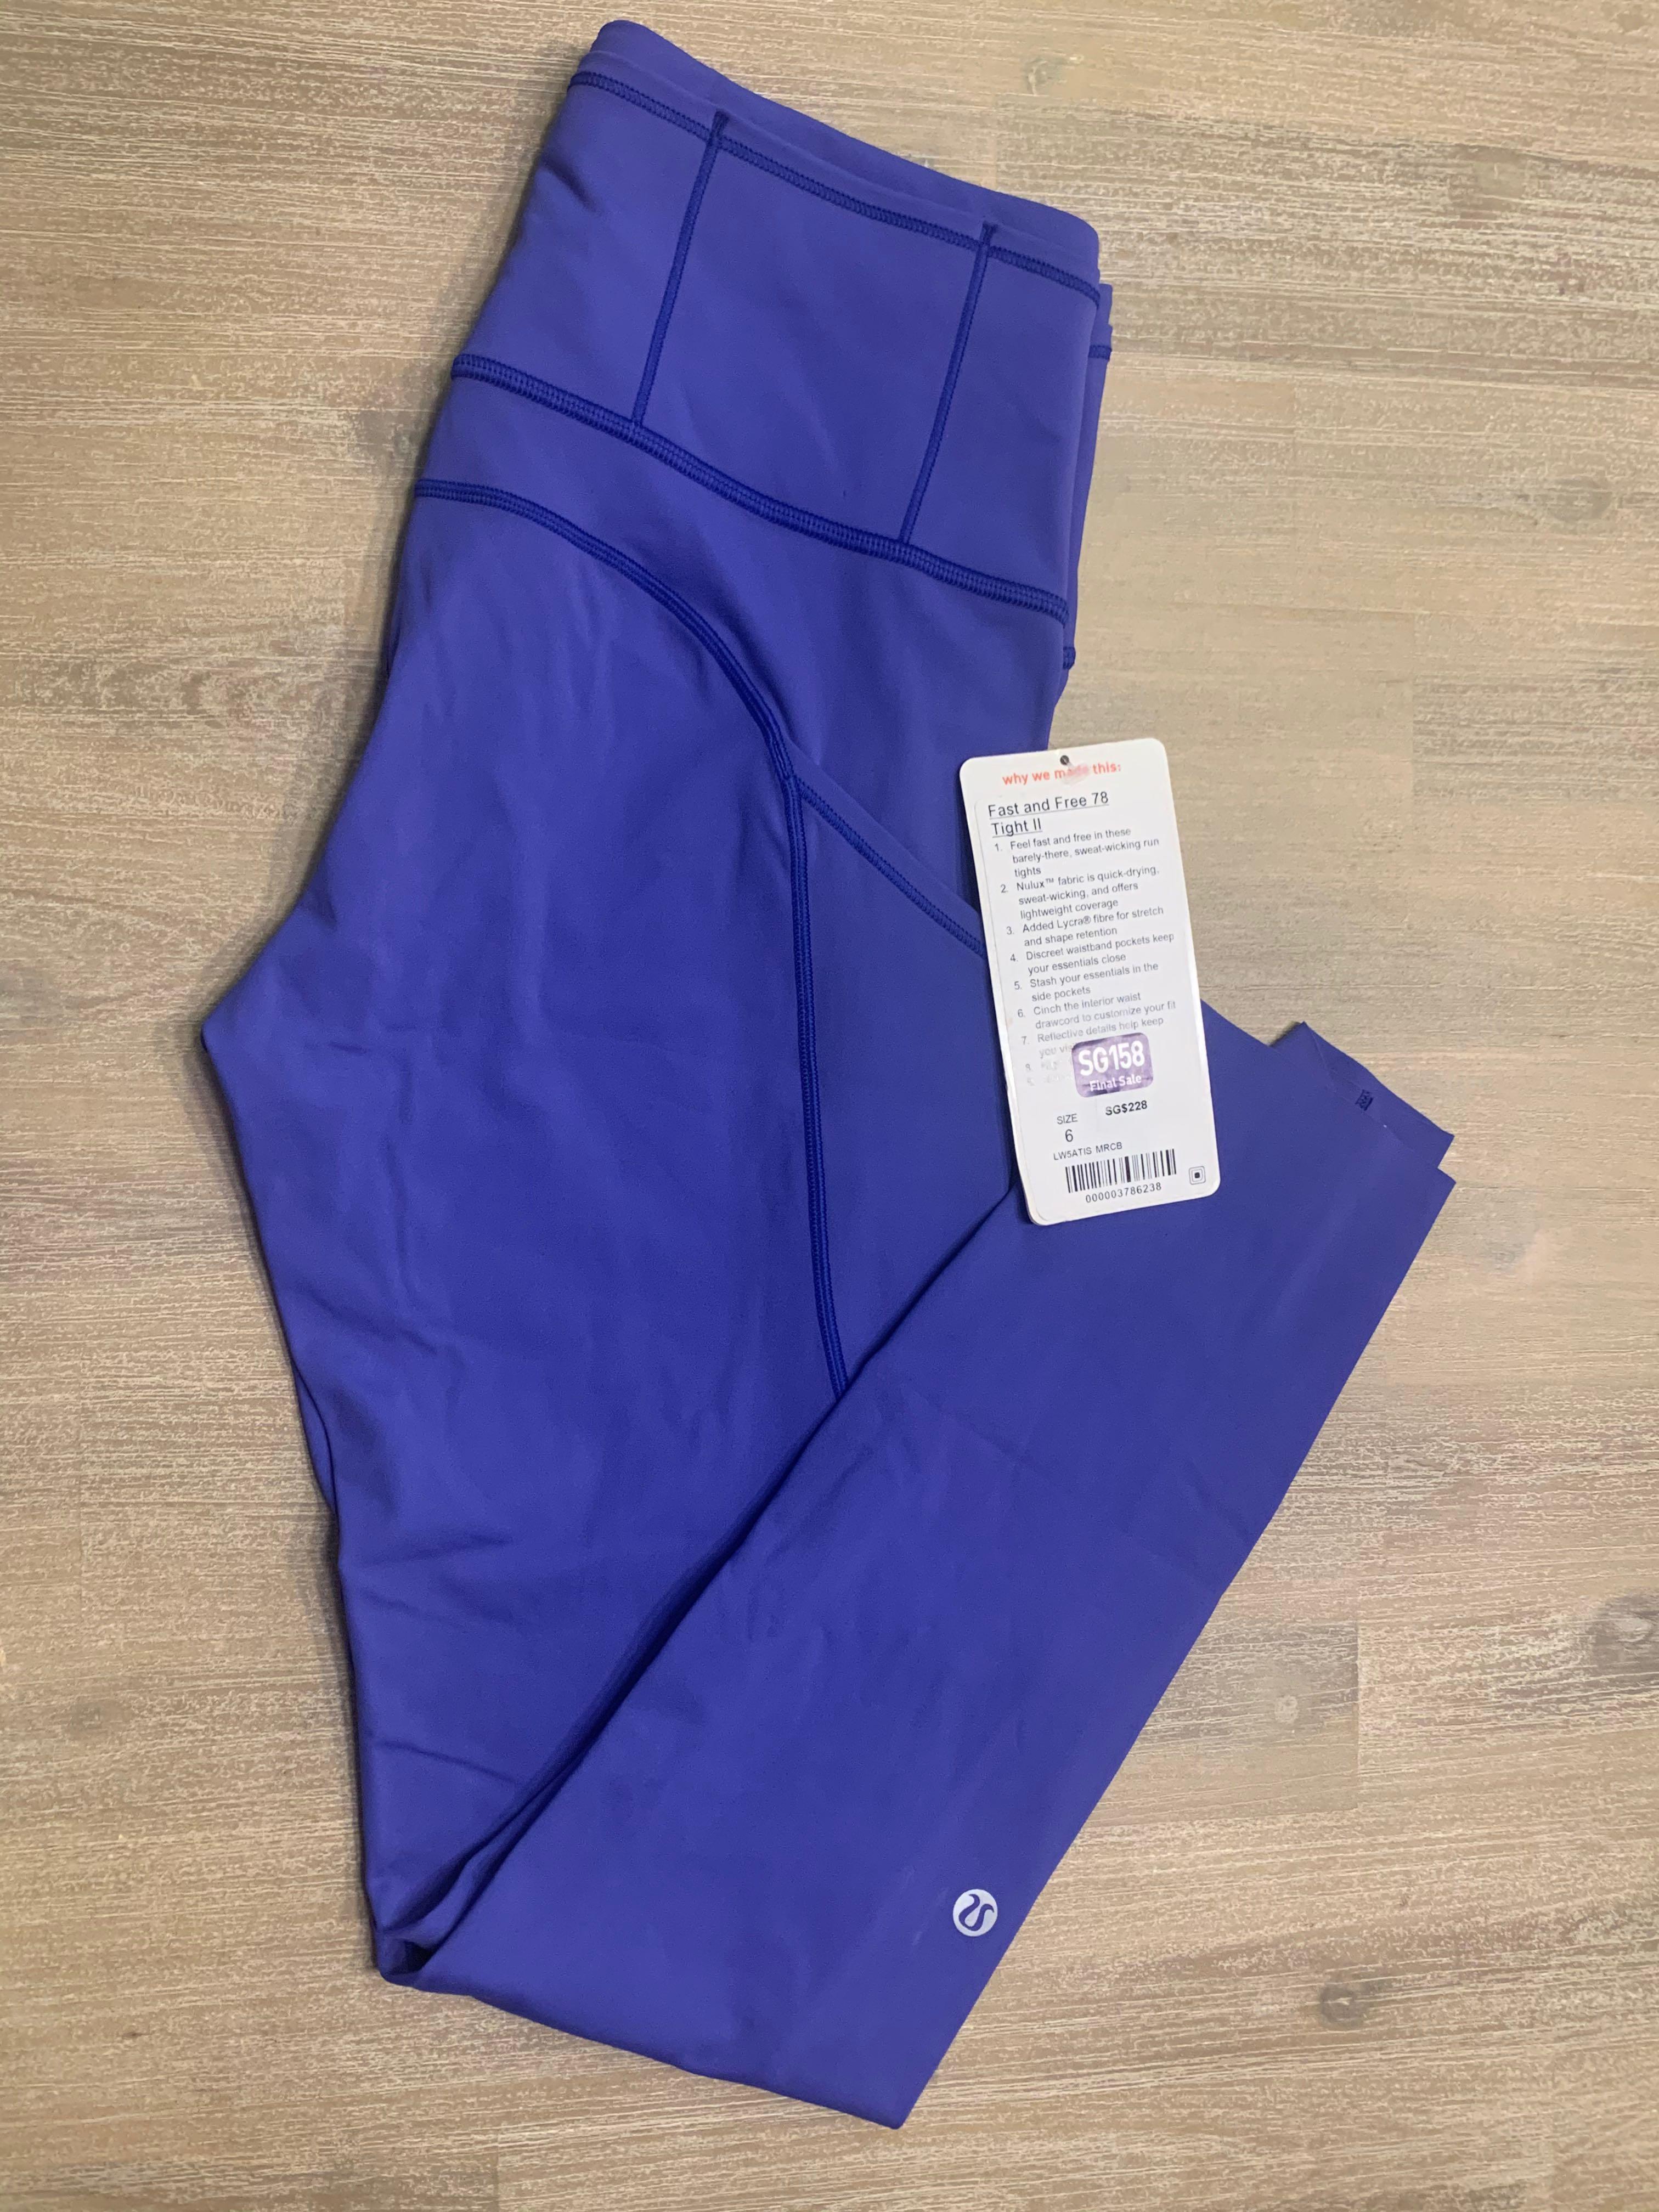 Lululemon - Fast & Free 7/8 Tight II in Moroccan Blue.WANT!